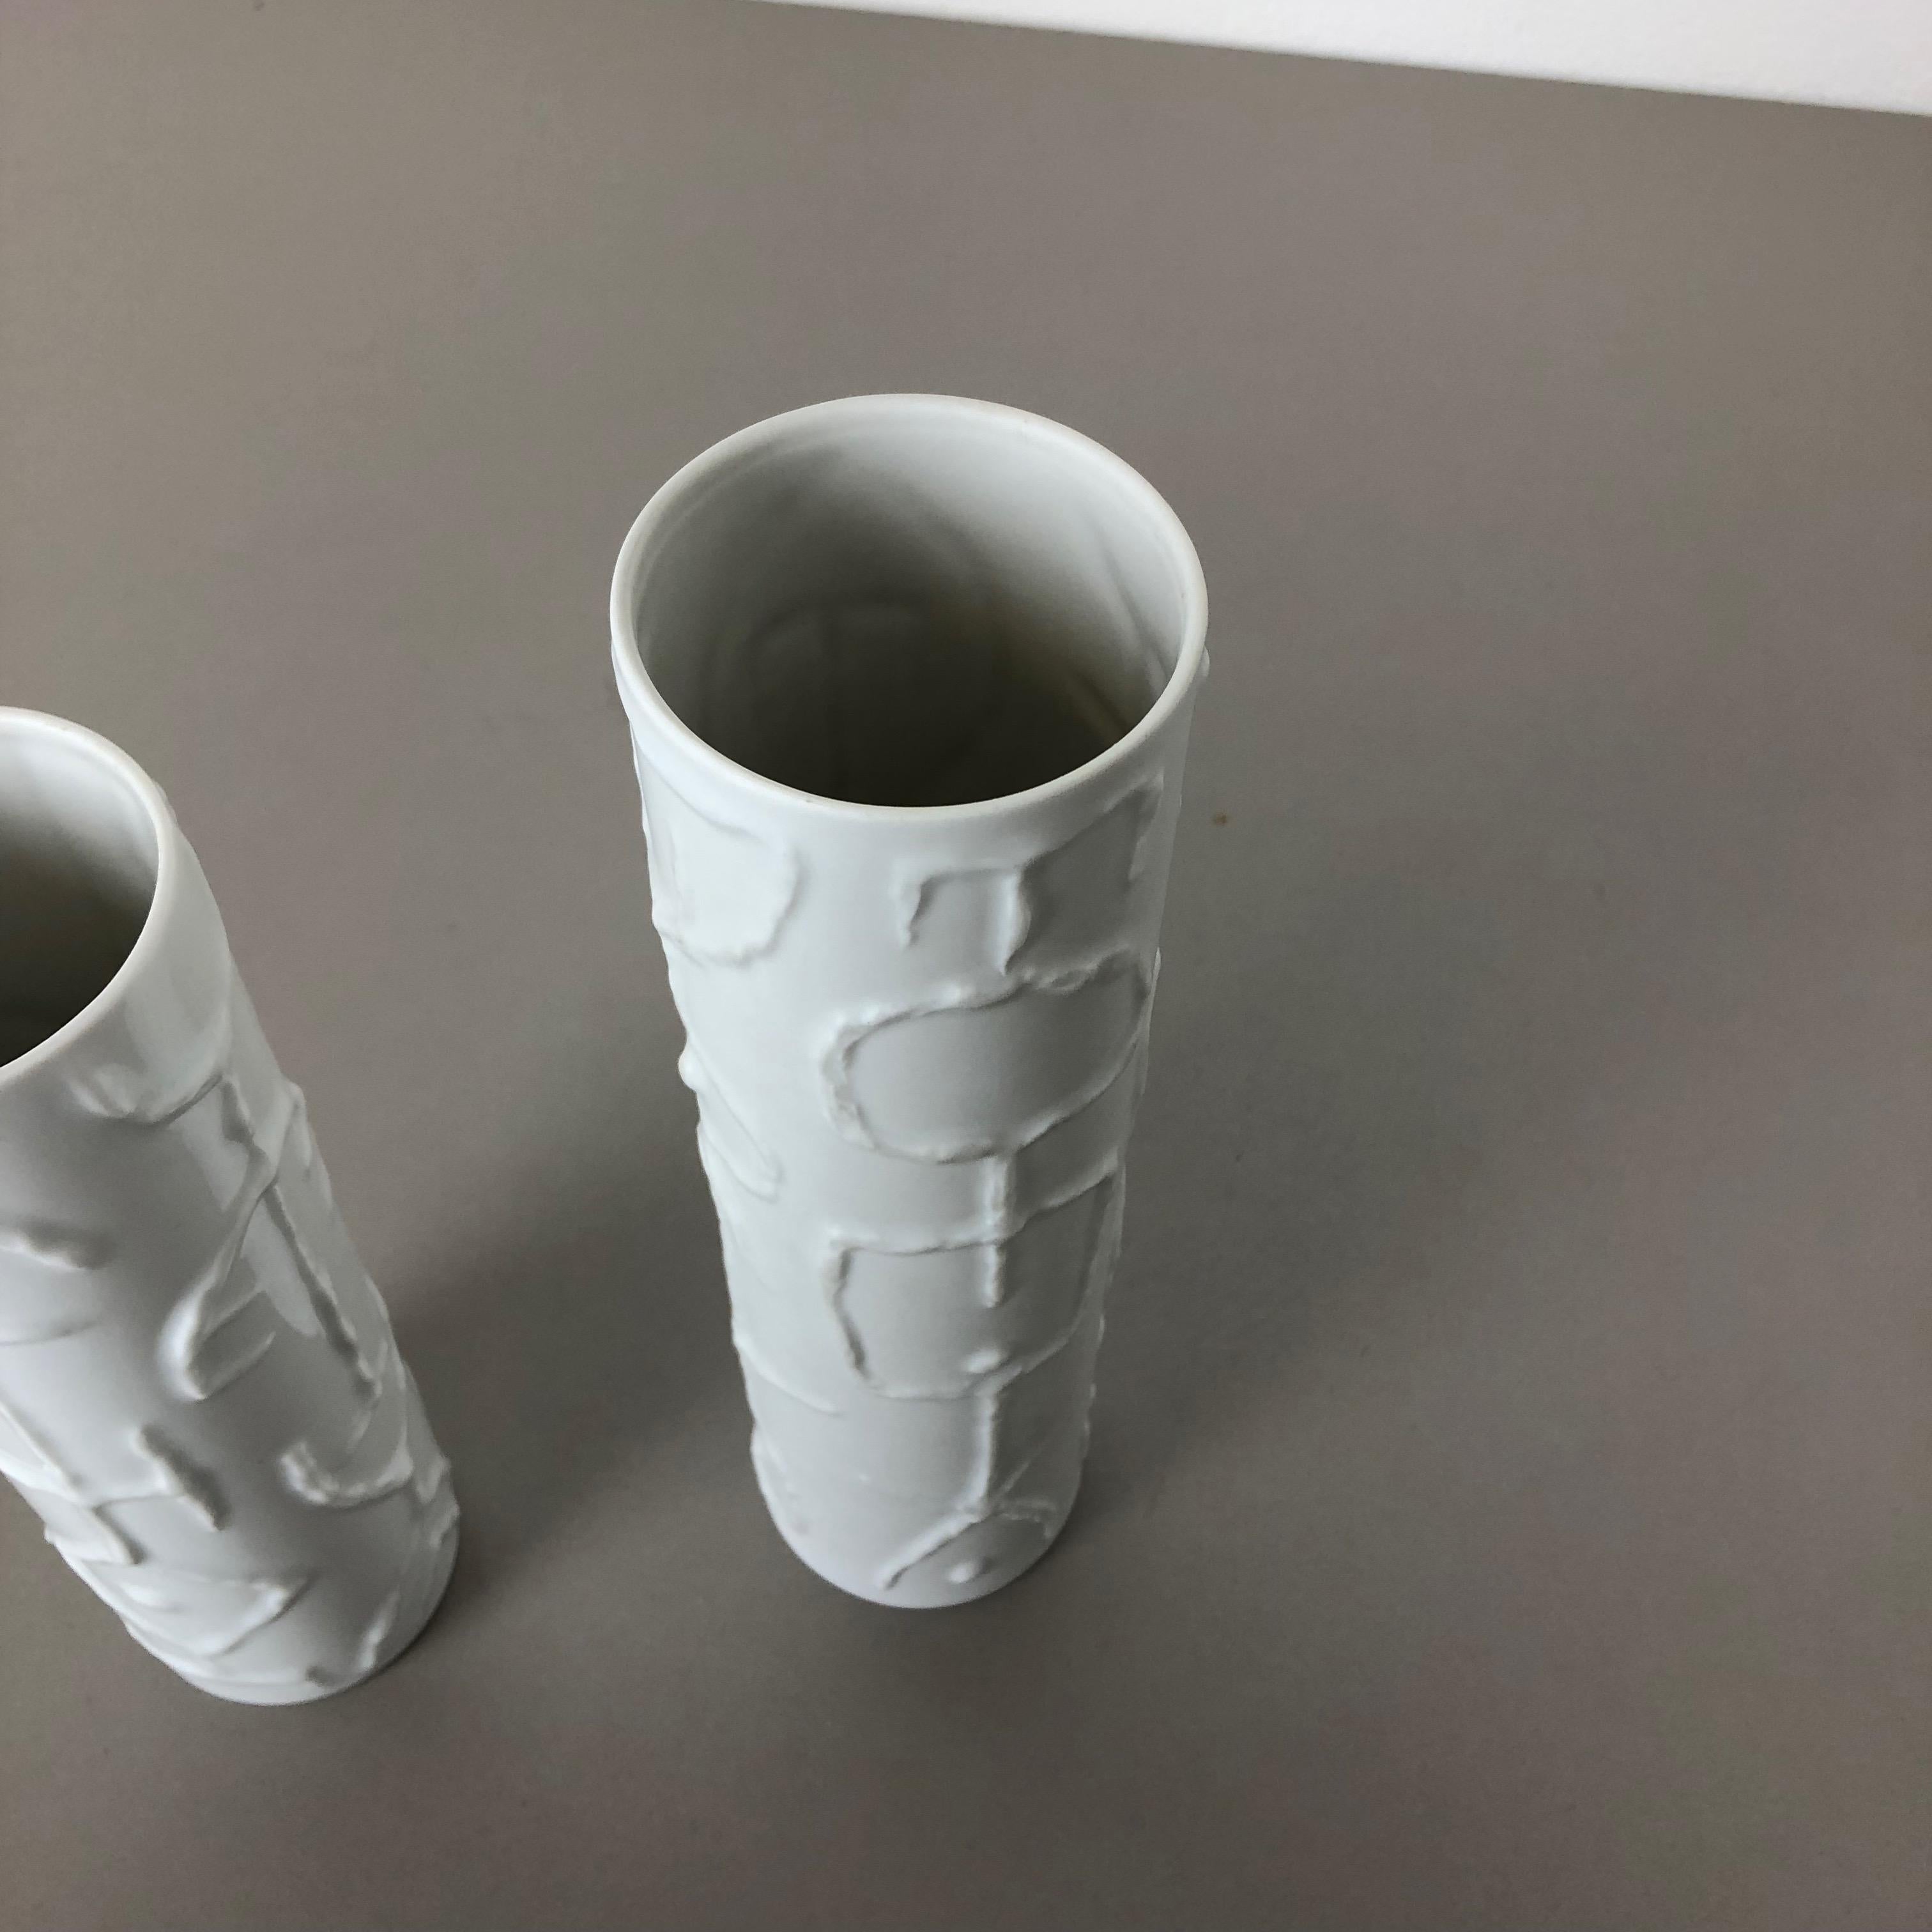 Set of 2 Abstract porcelain Vases by Cuno Fischer for Rosenthal, Germany, 1980s For Sale 2